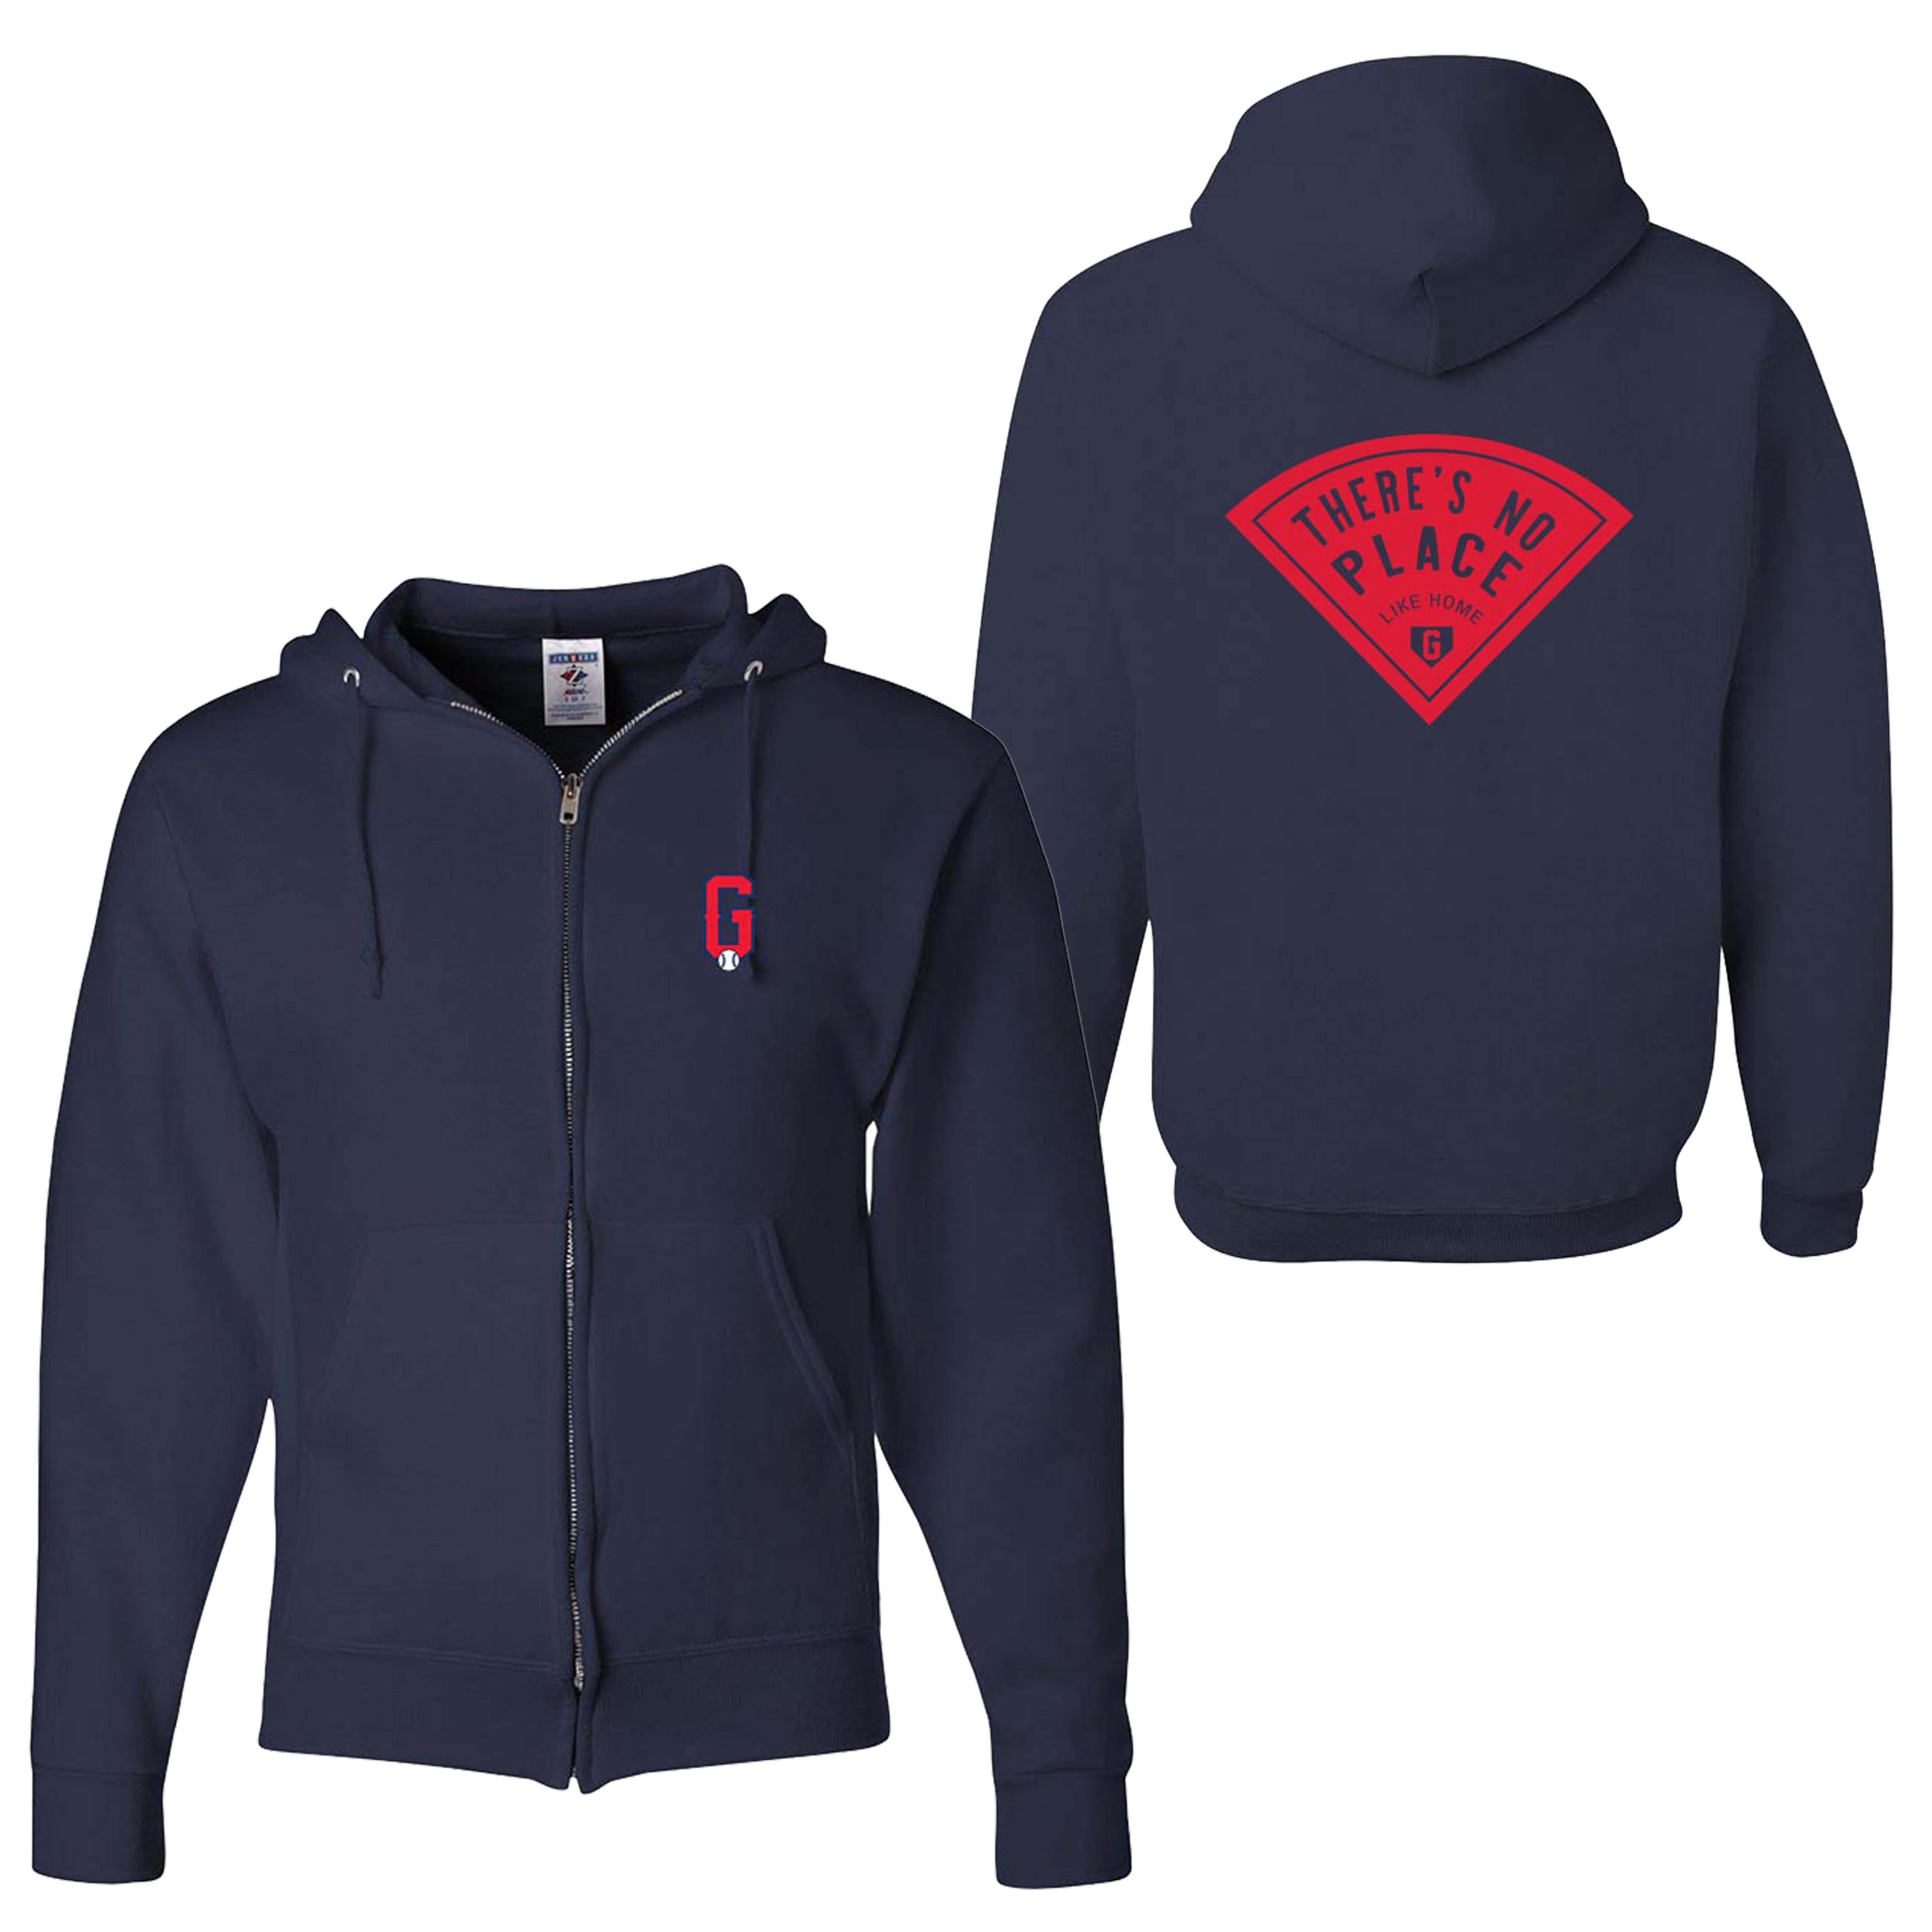 NO PLACE LIKE HOME ZIP HOODIE ~  GLENVIEW PATRIOTS ~  unisex